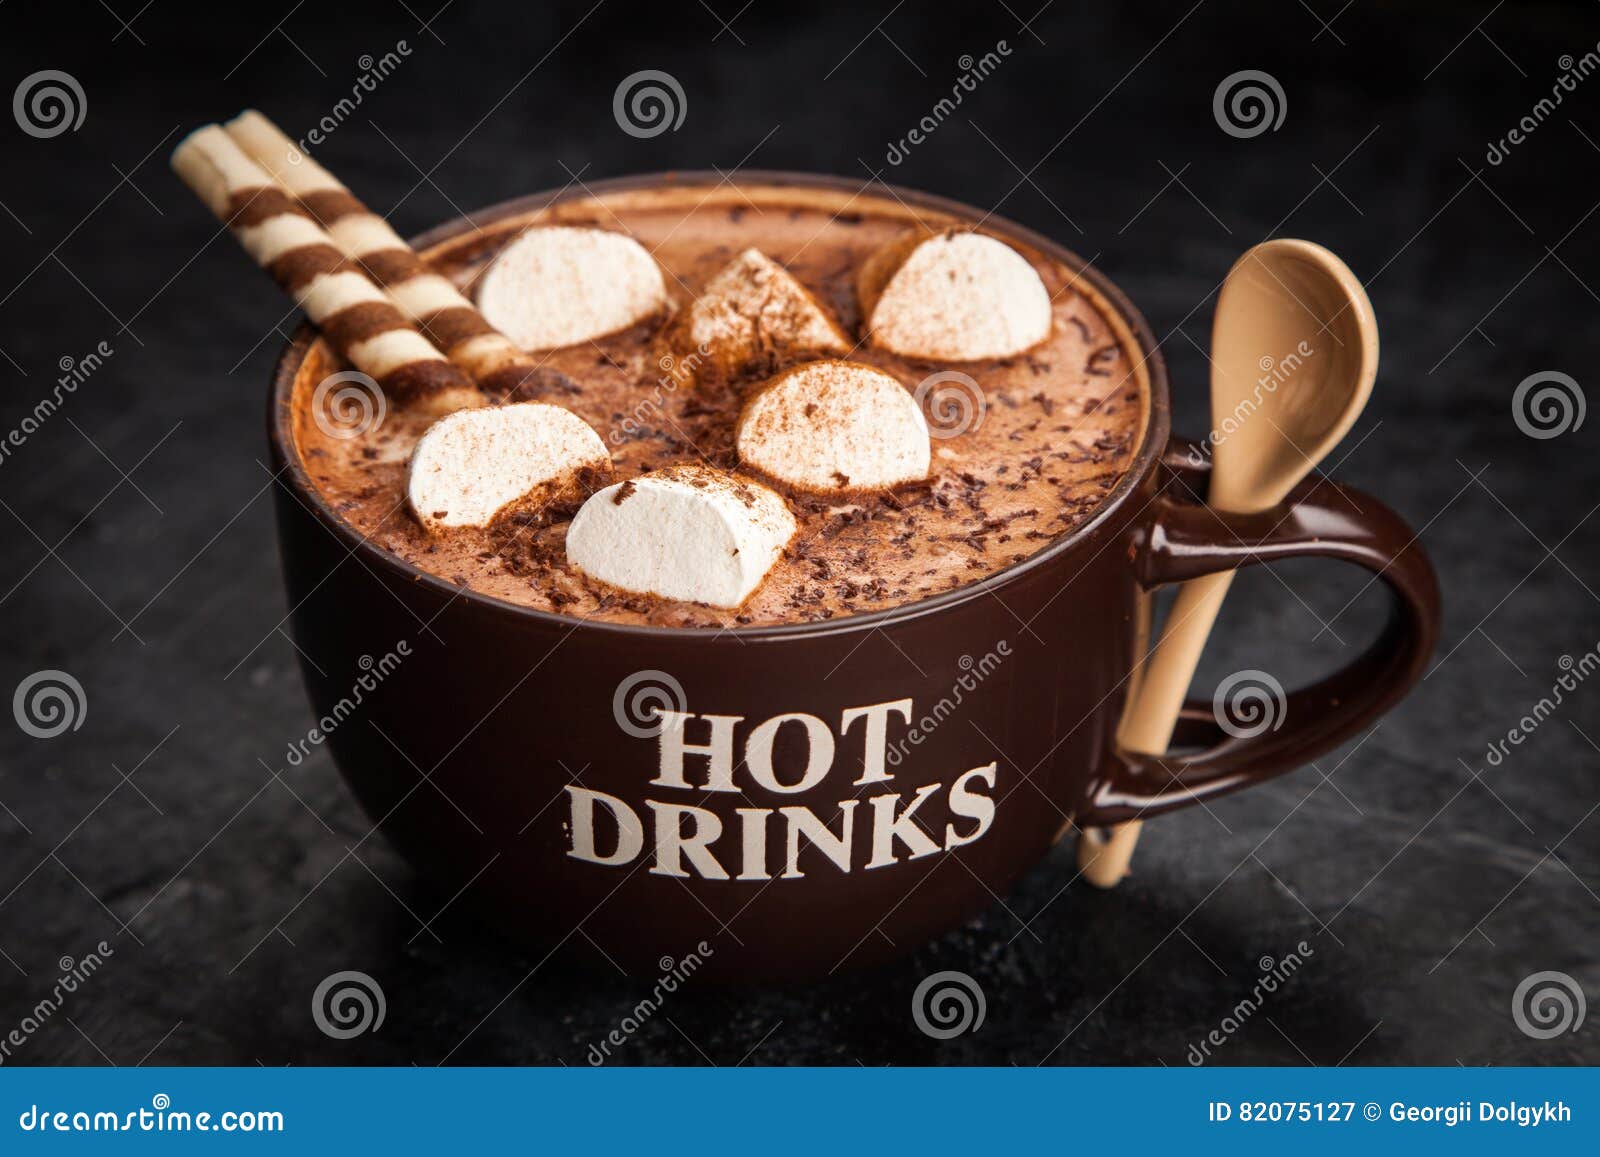 https://thumbs.dreamstime.com/z/cup-hot-chocolate-large-82075127.jpg